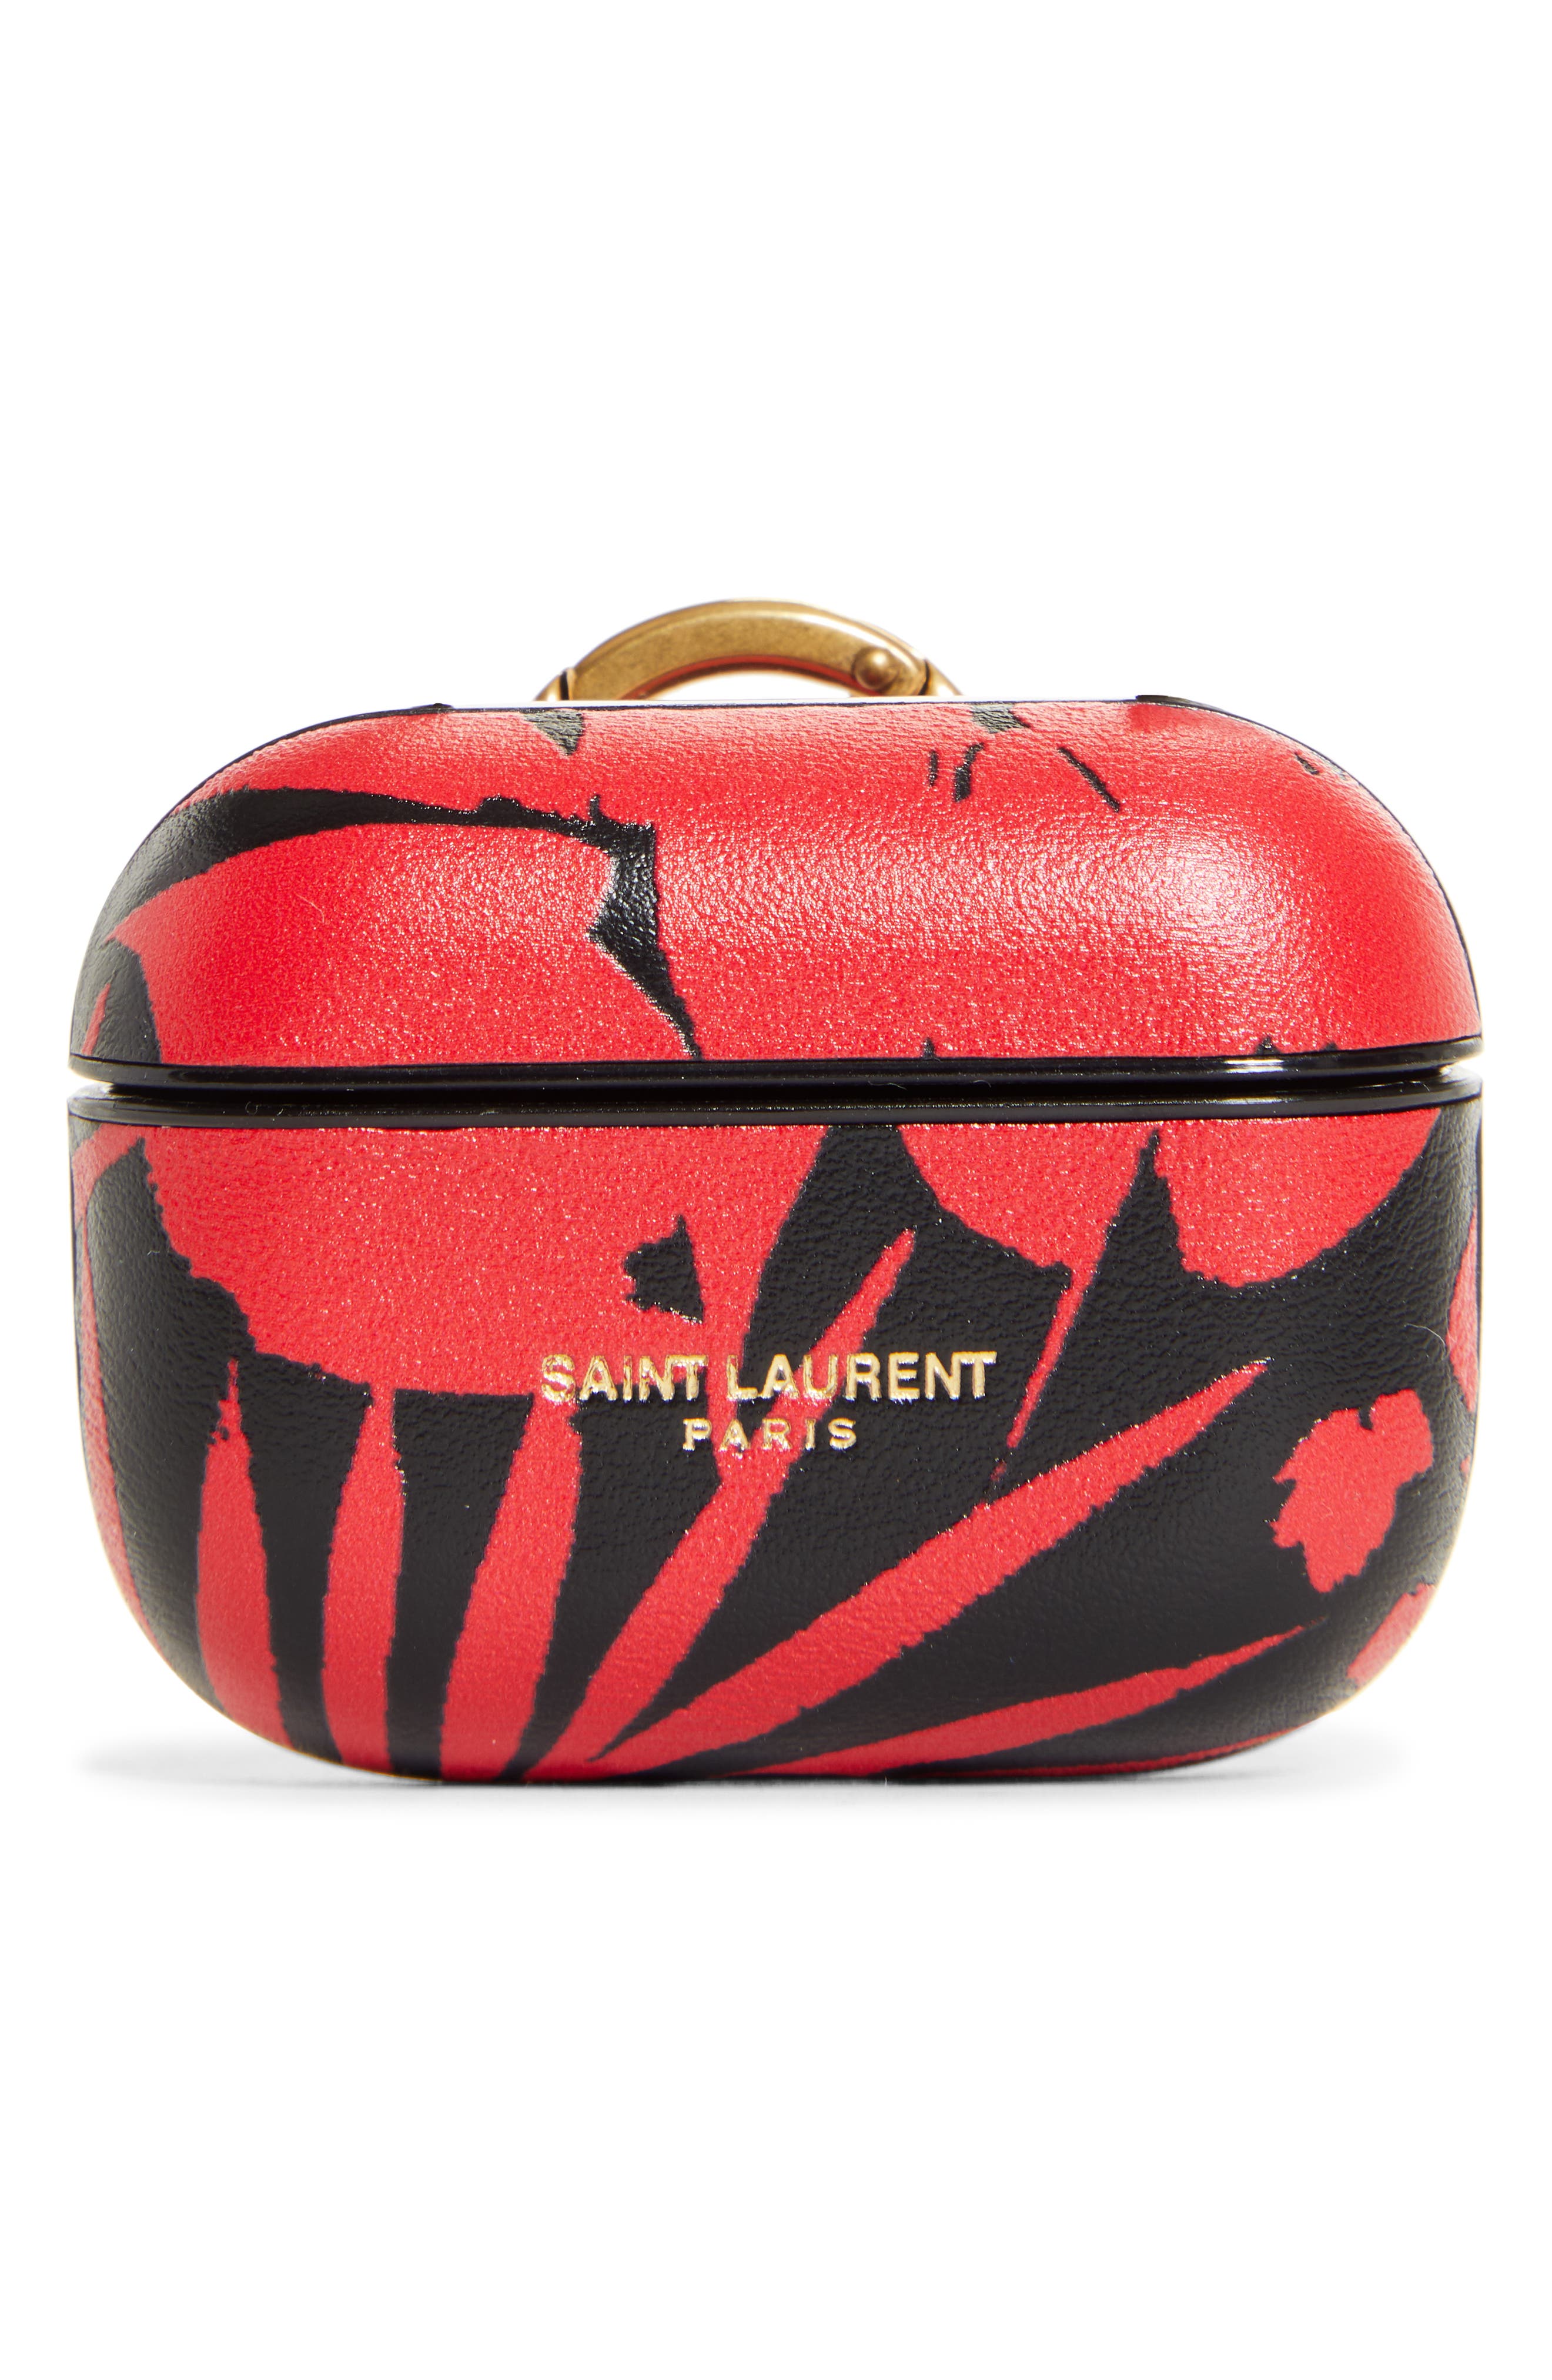 Saint Laurent Tropical Print Leather AirPods Pro Case in Nero/Rouge/Black Matte at Nordstrom